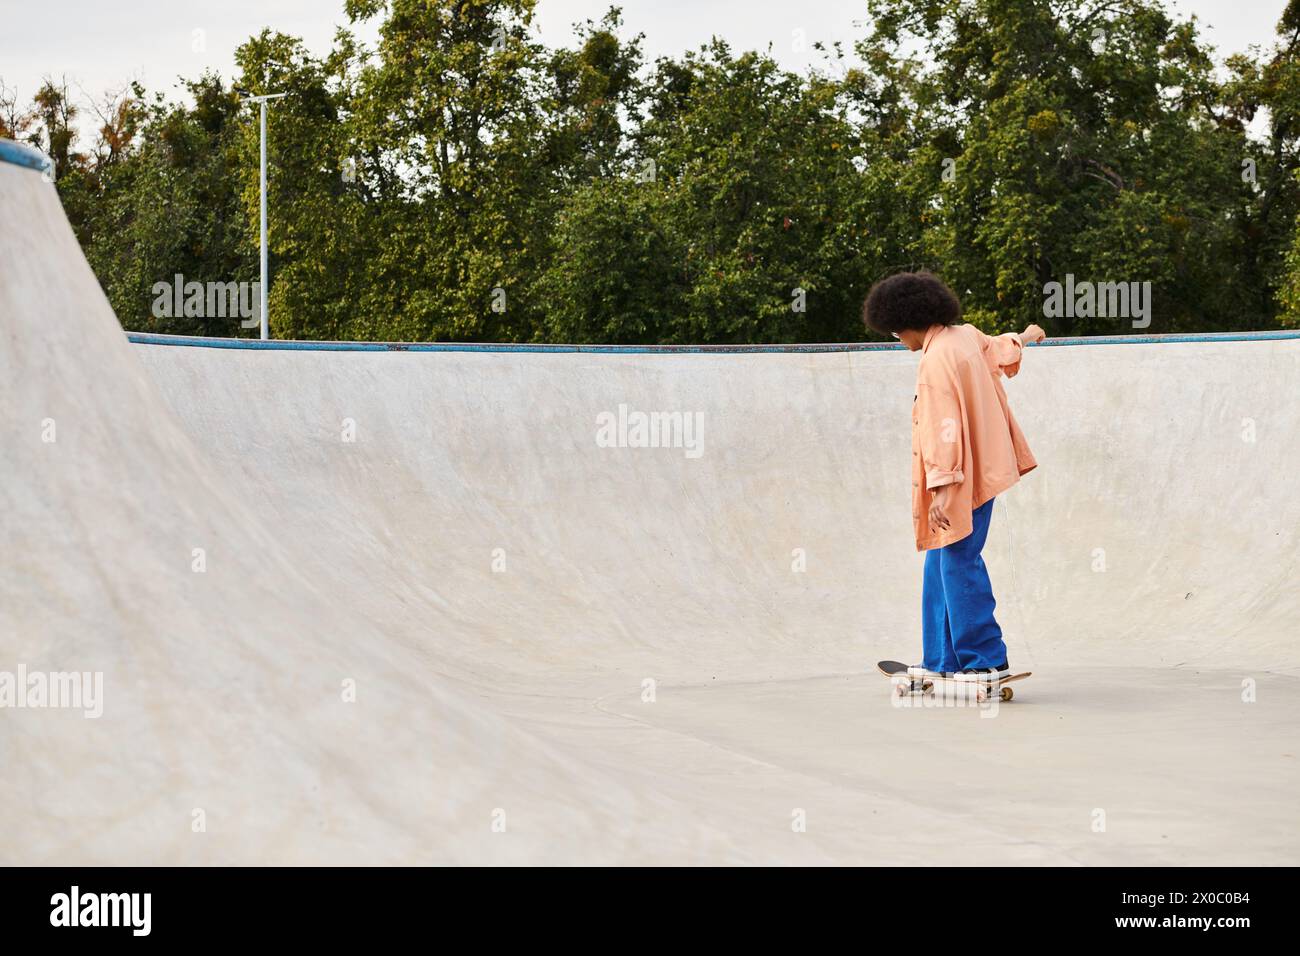 A young African American woman with curly hair skateboarding at a skate park, performing tricks on the ramps and rails. Stock Photo